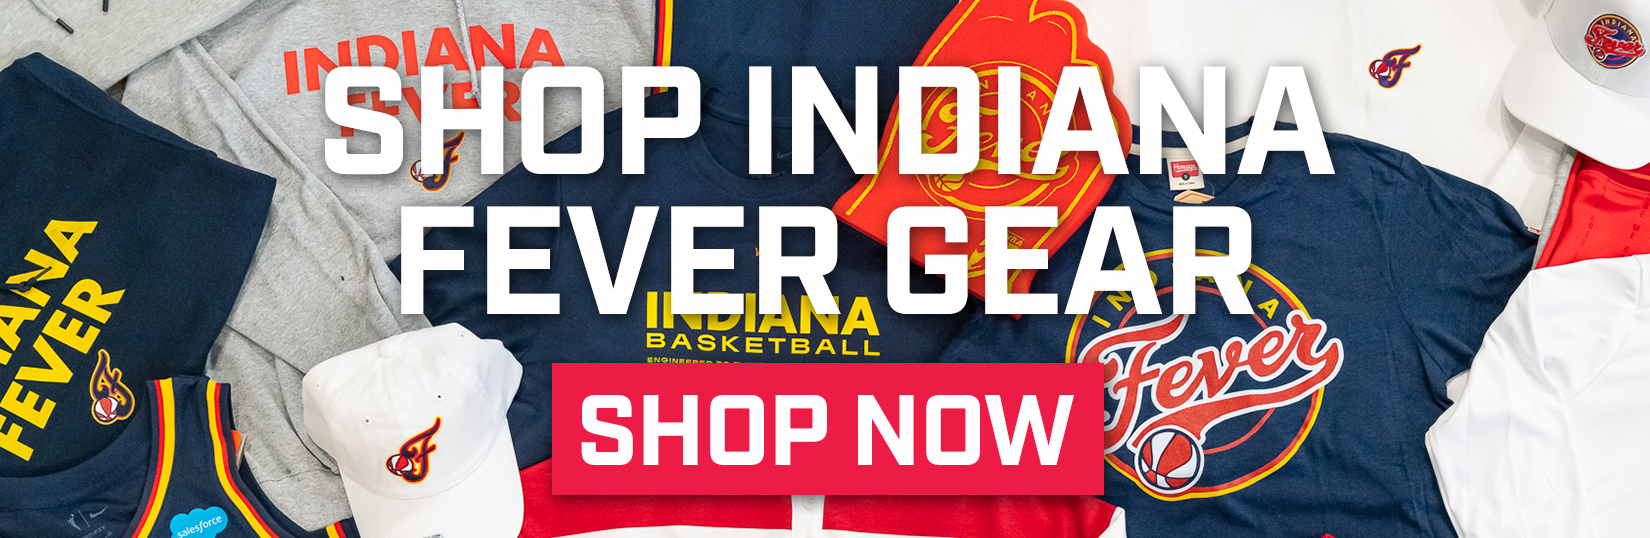 Shop Indiana Fever Gear - SHOP NOW